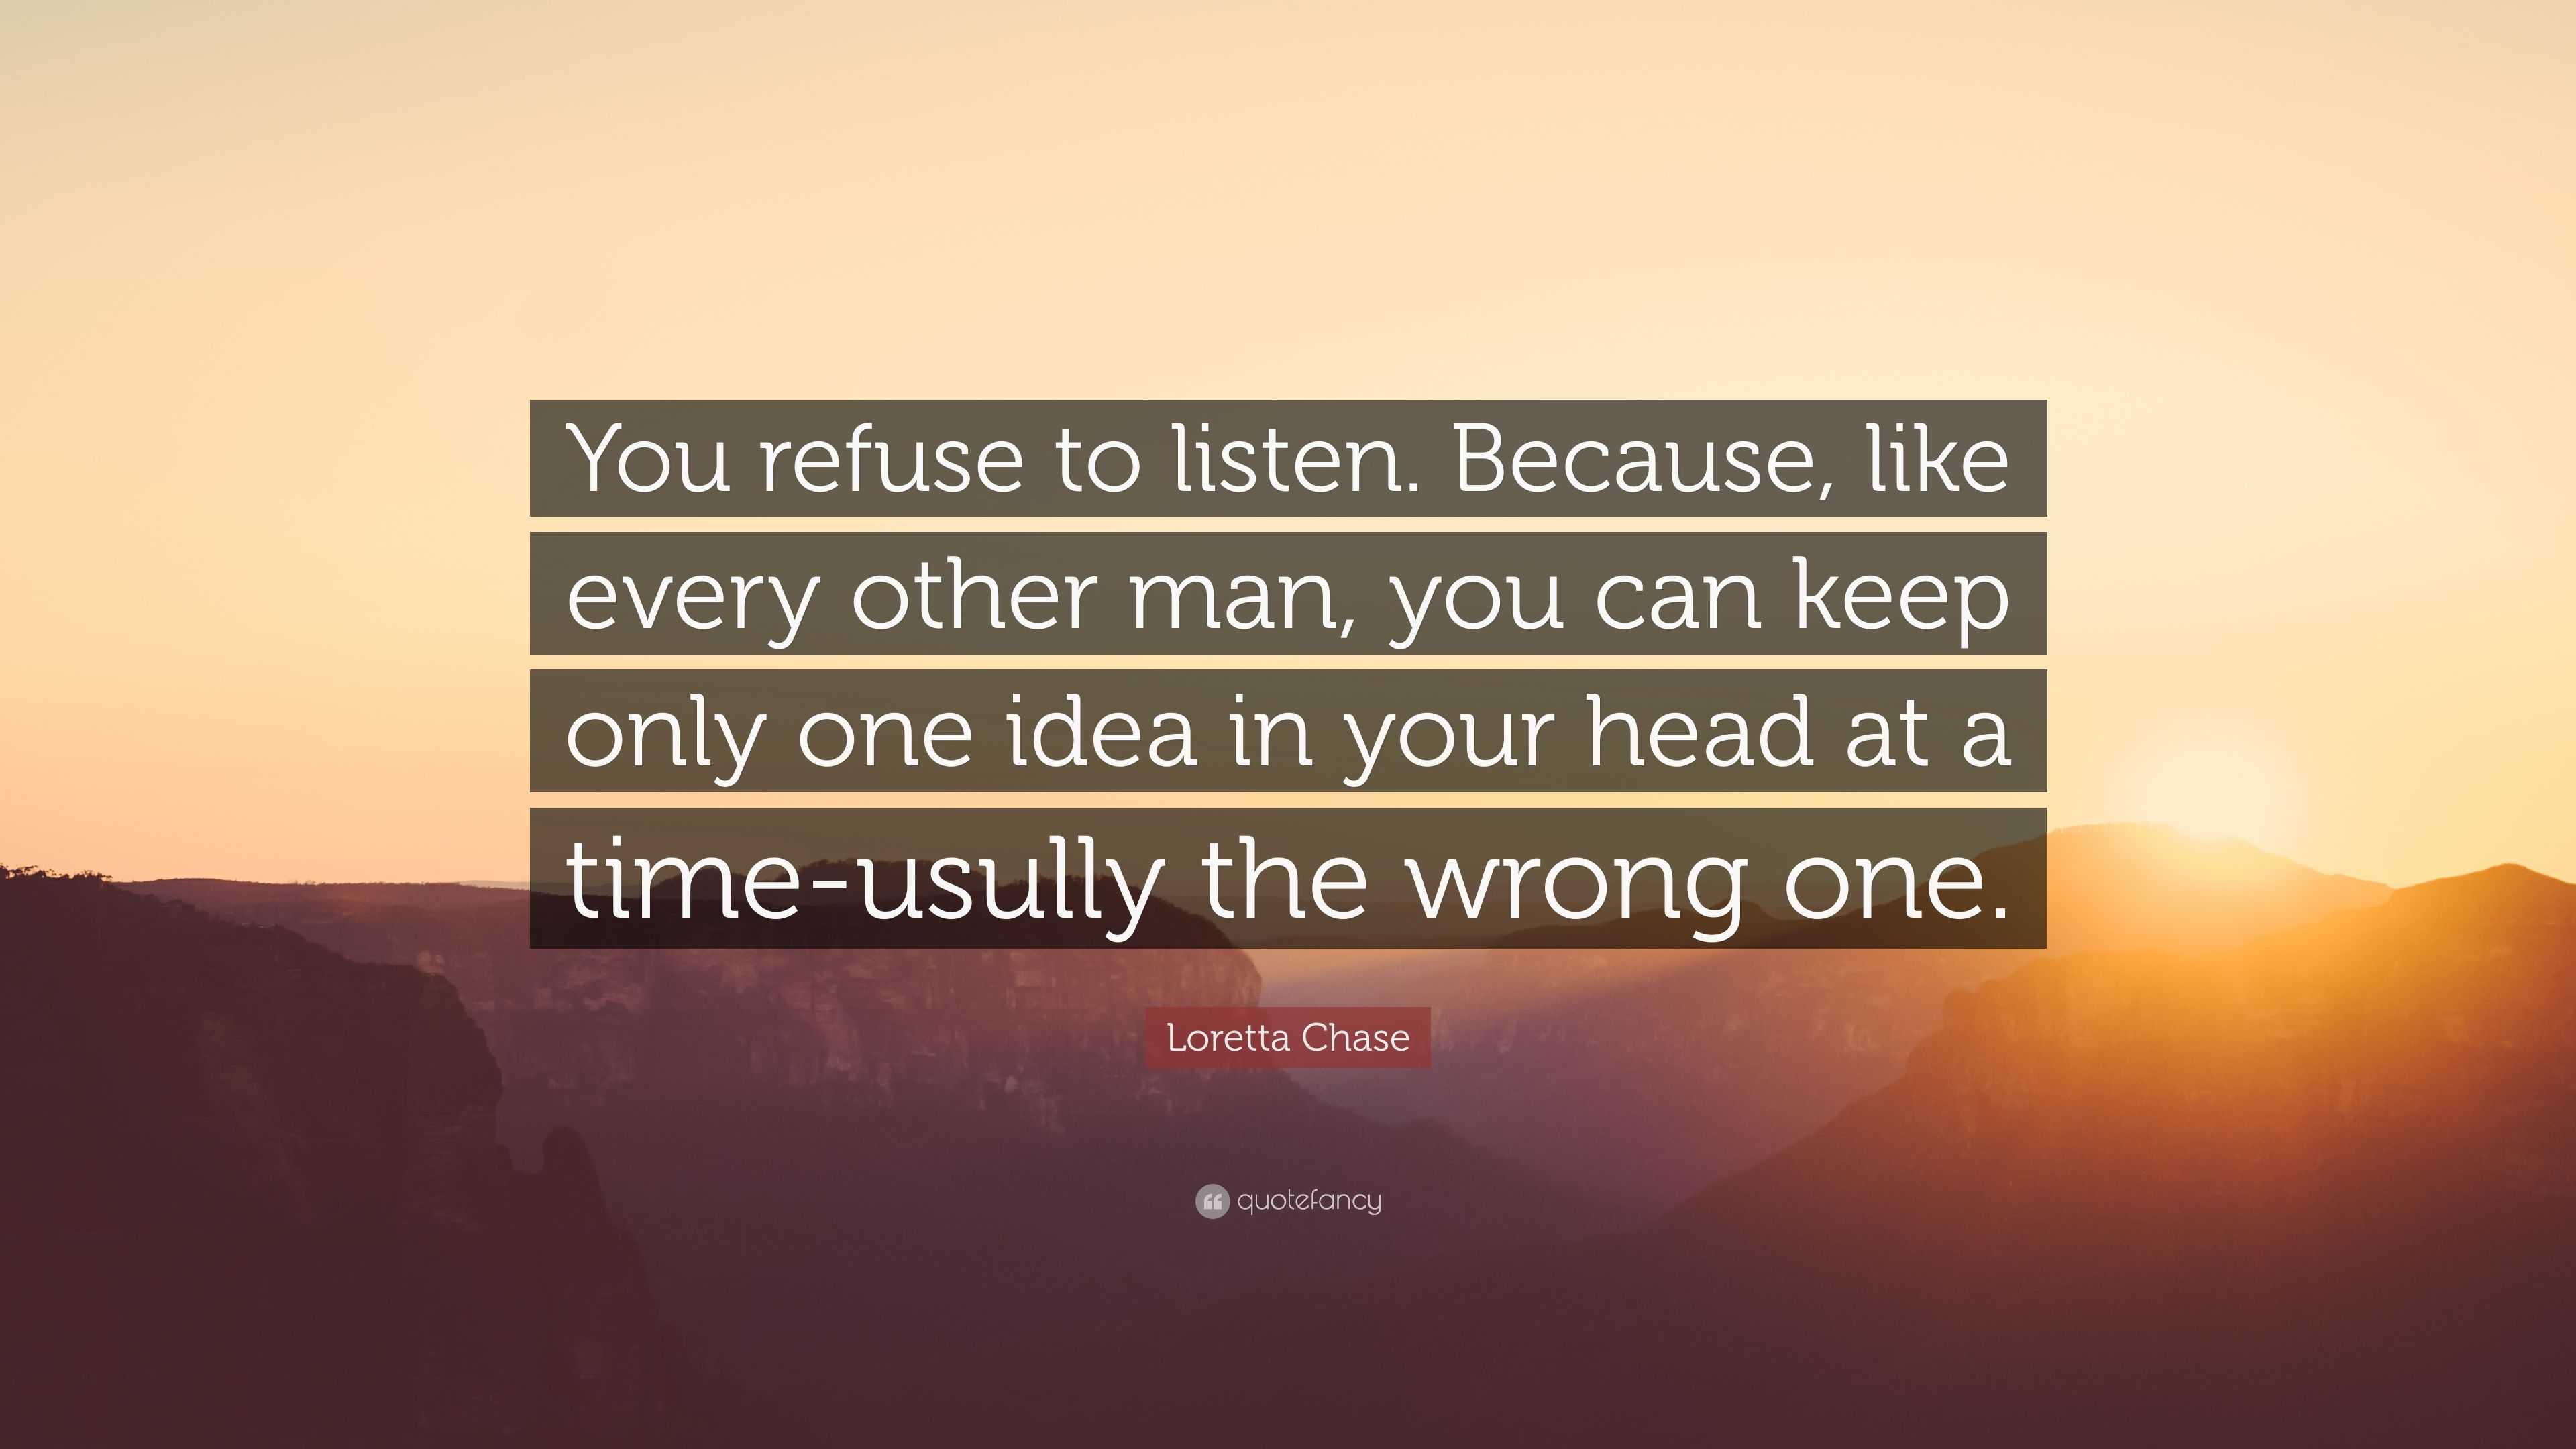 Loretta Chase Quote: “You refuse to listen. Because, like every other ...